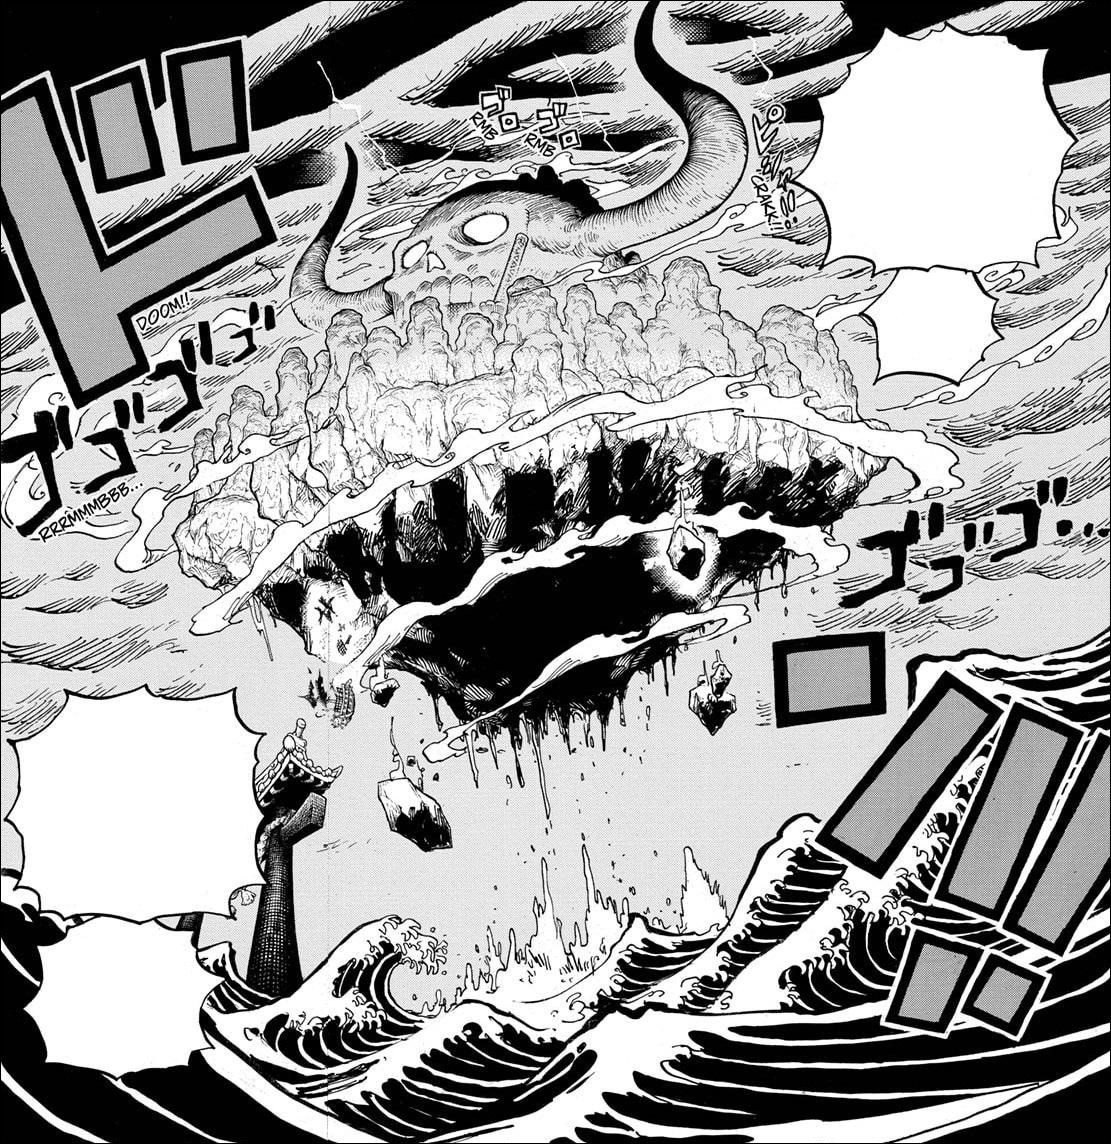 One Piece chapter 997 - Kaido lifts Onigashima Island up into the sky with his flame clouds